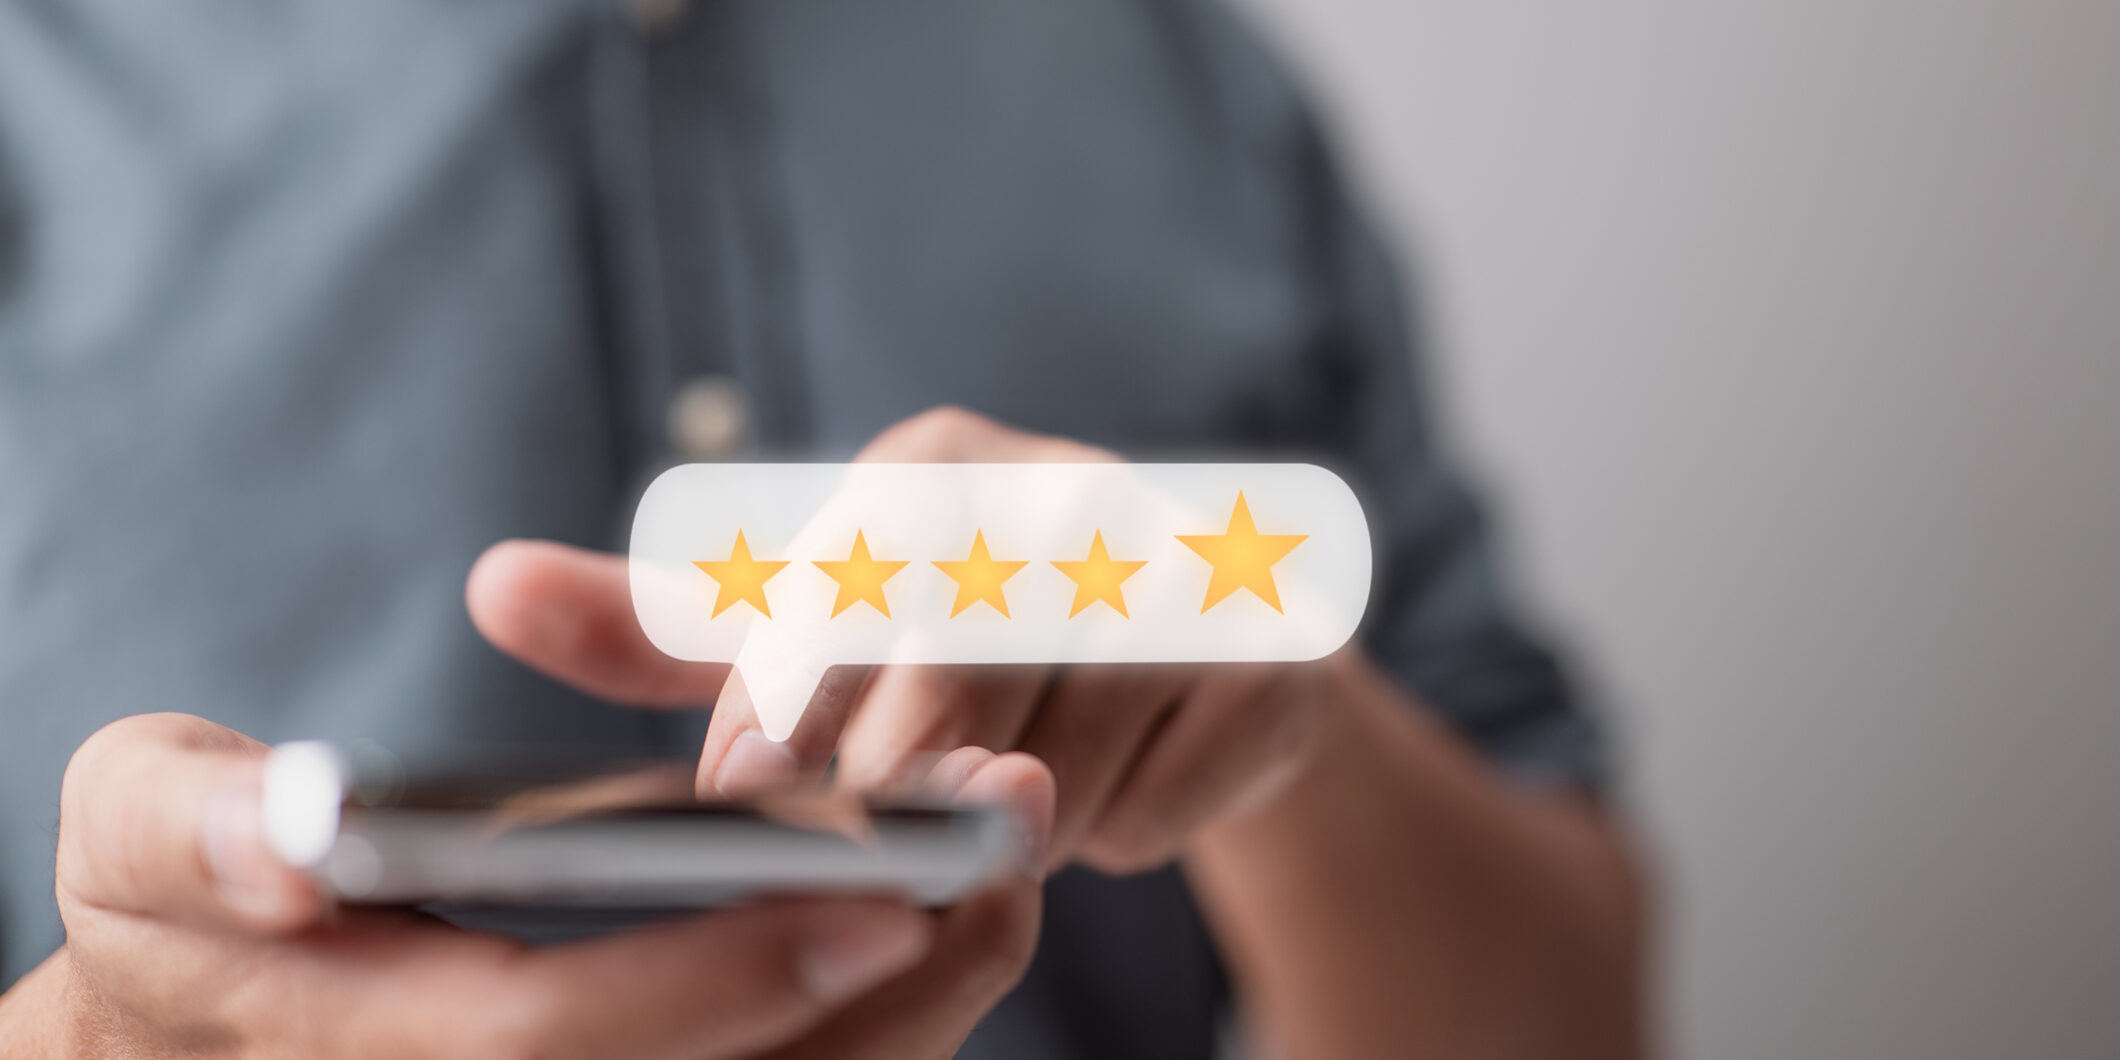 A man enters a five-star review on his smartphone in an example of a business leveraging customer service lessons.